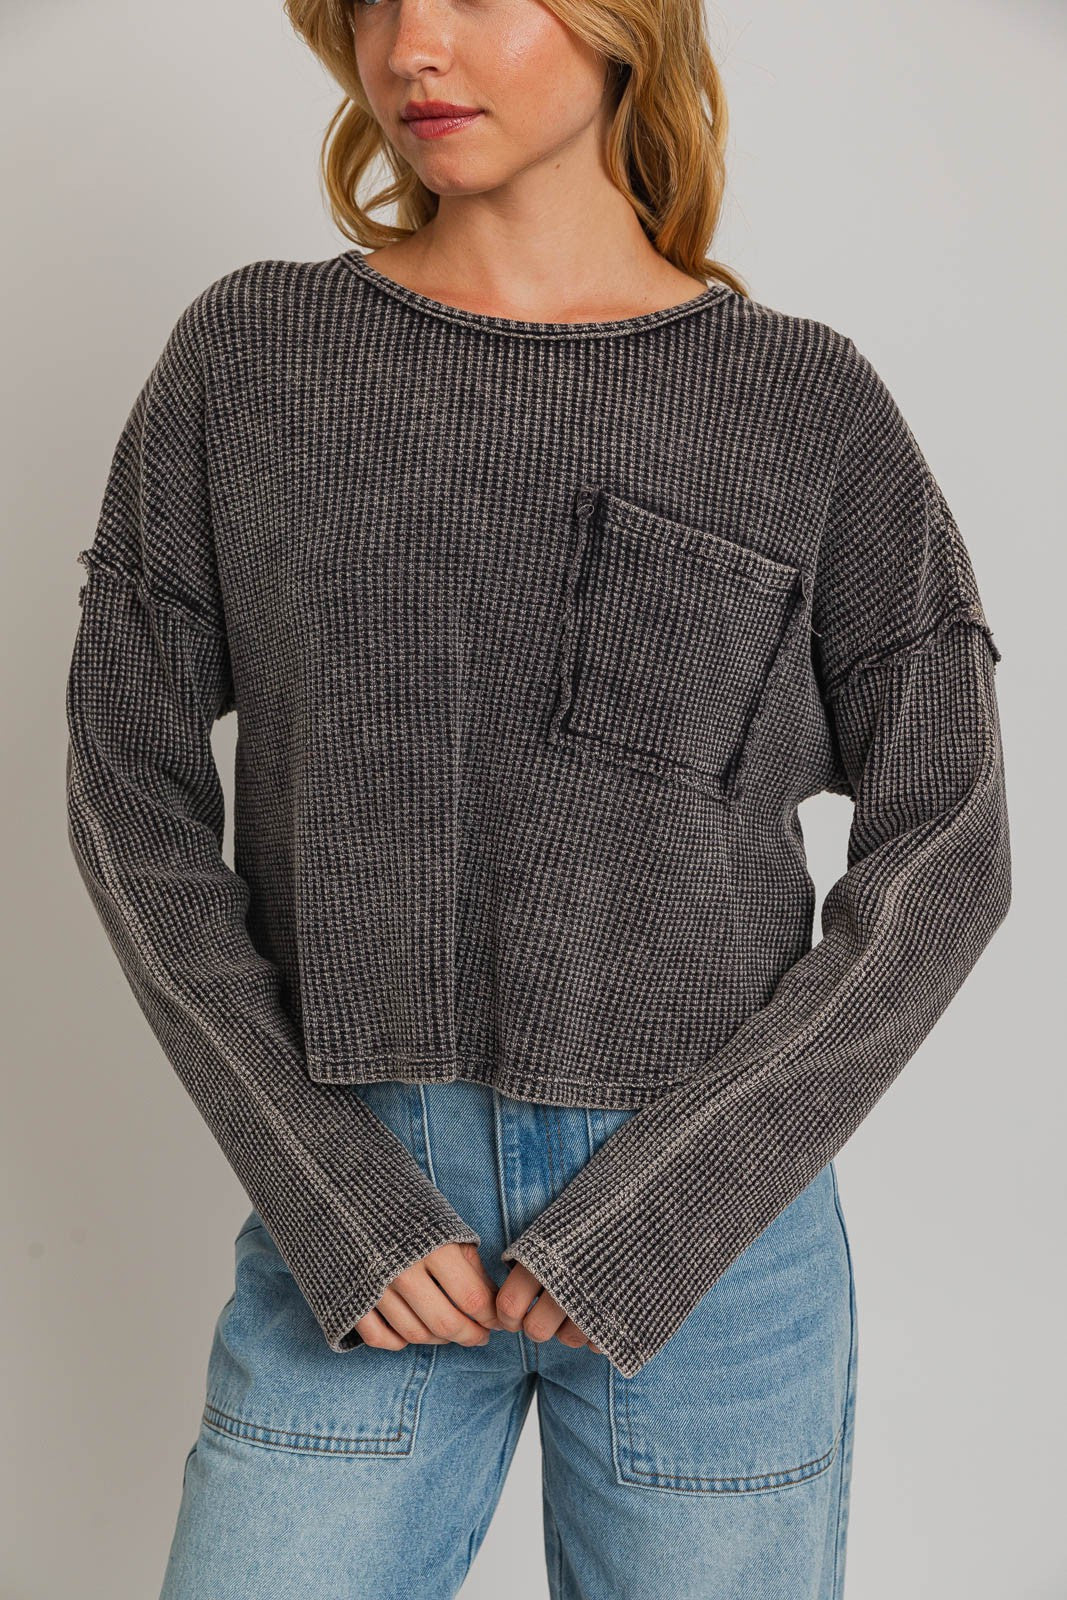 Le Lis | Charcoal Thermal Knit Top | Sweetest Stitch Online Boutique